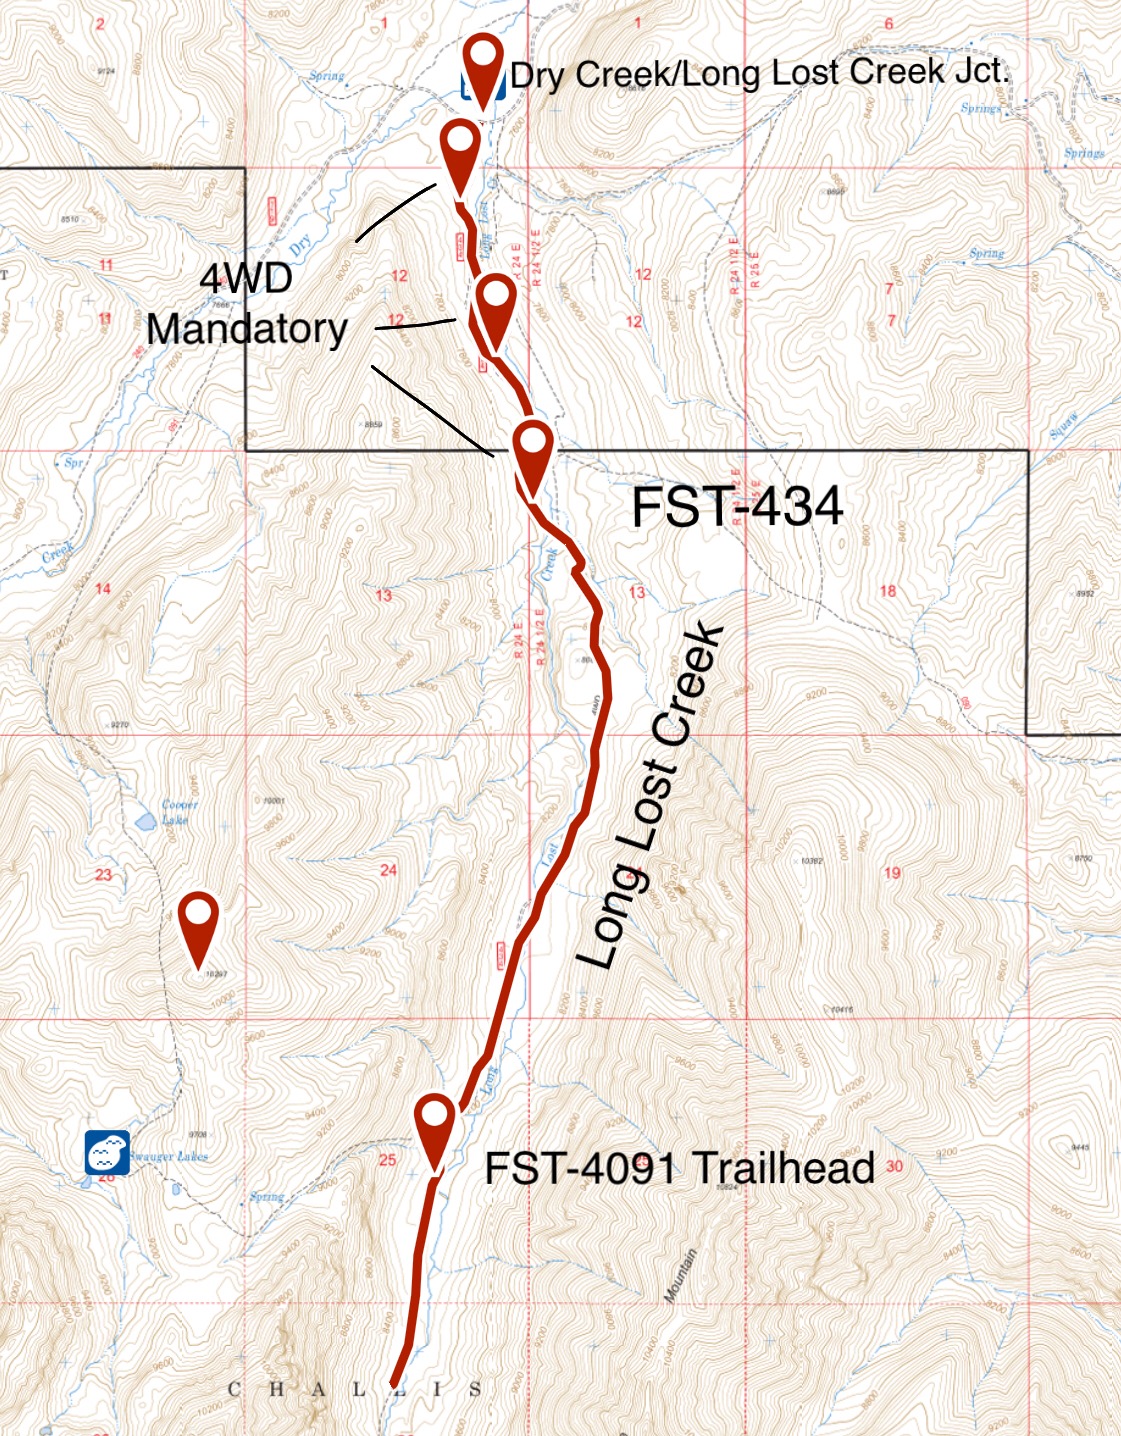 From the junction of the Dry Creek Road and the Long Lost Road FS-434 wanders 4.9 miles up Long Lost Creek. 